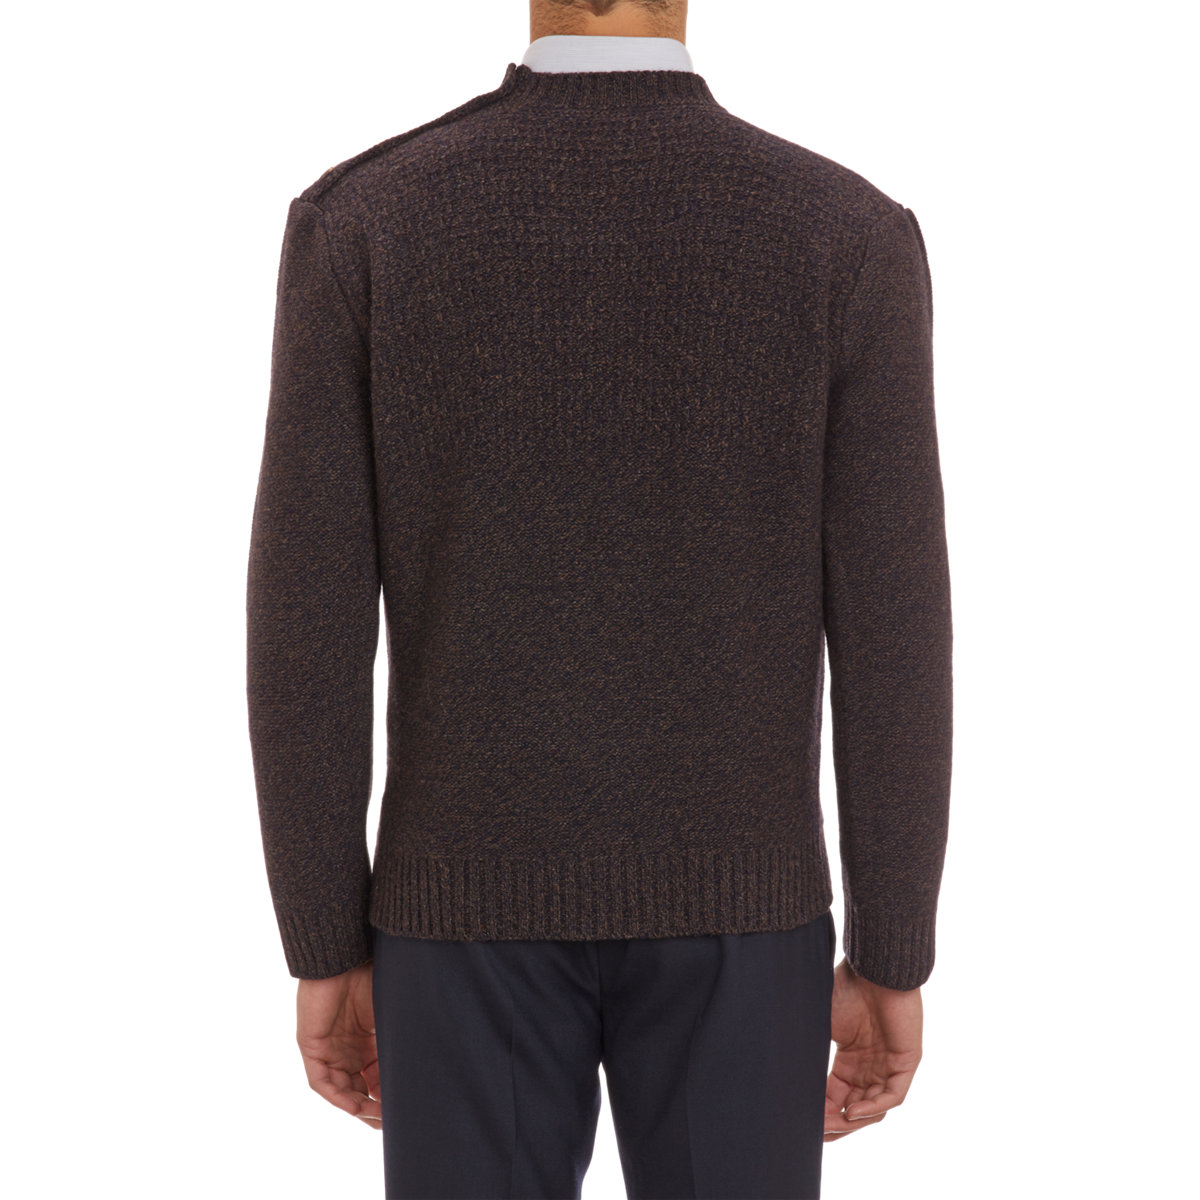 Inis meáin Button-Up Shoulder Pullover Sweater-Brown Size Extra Large ...